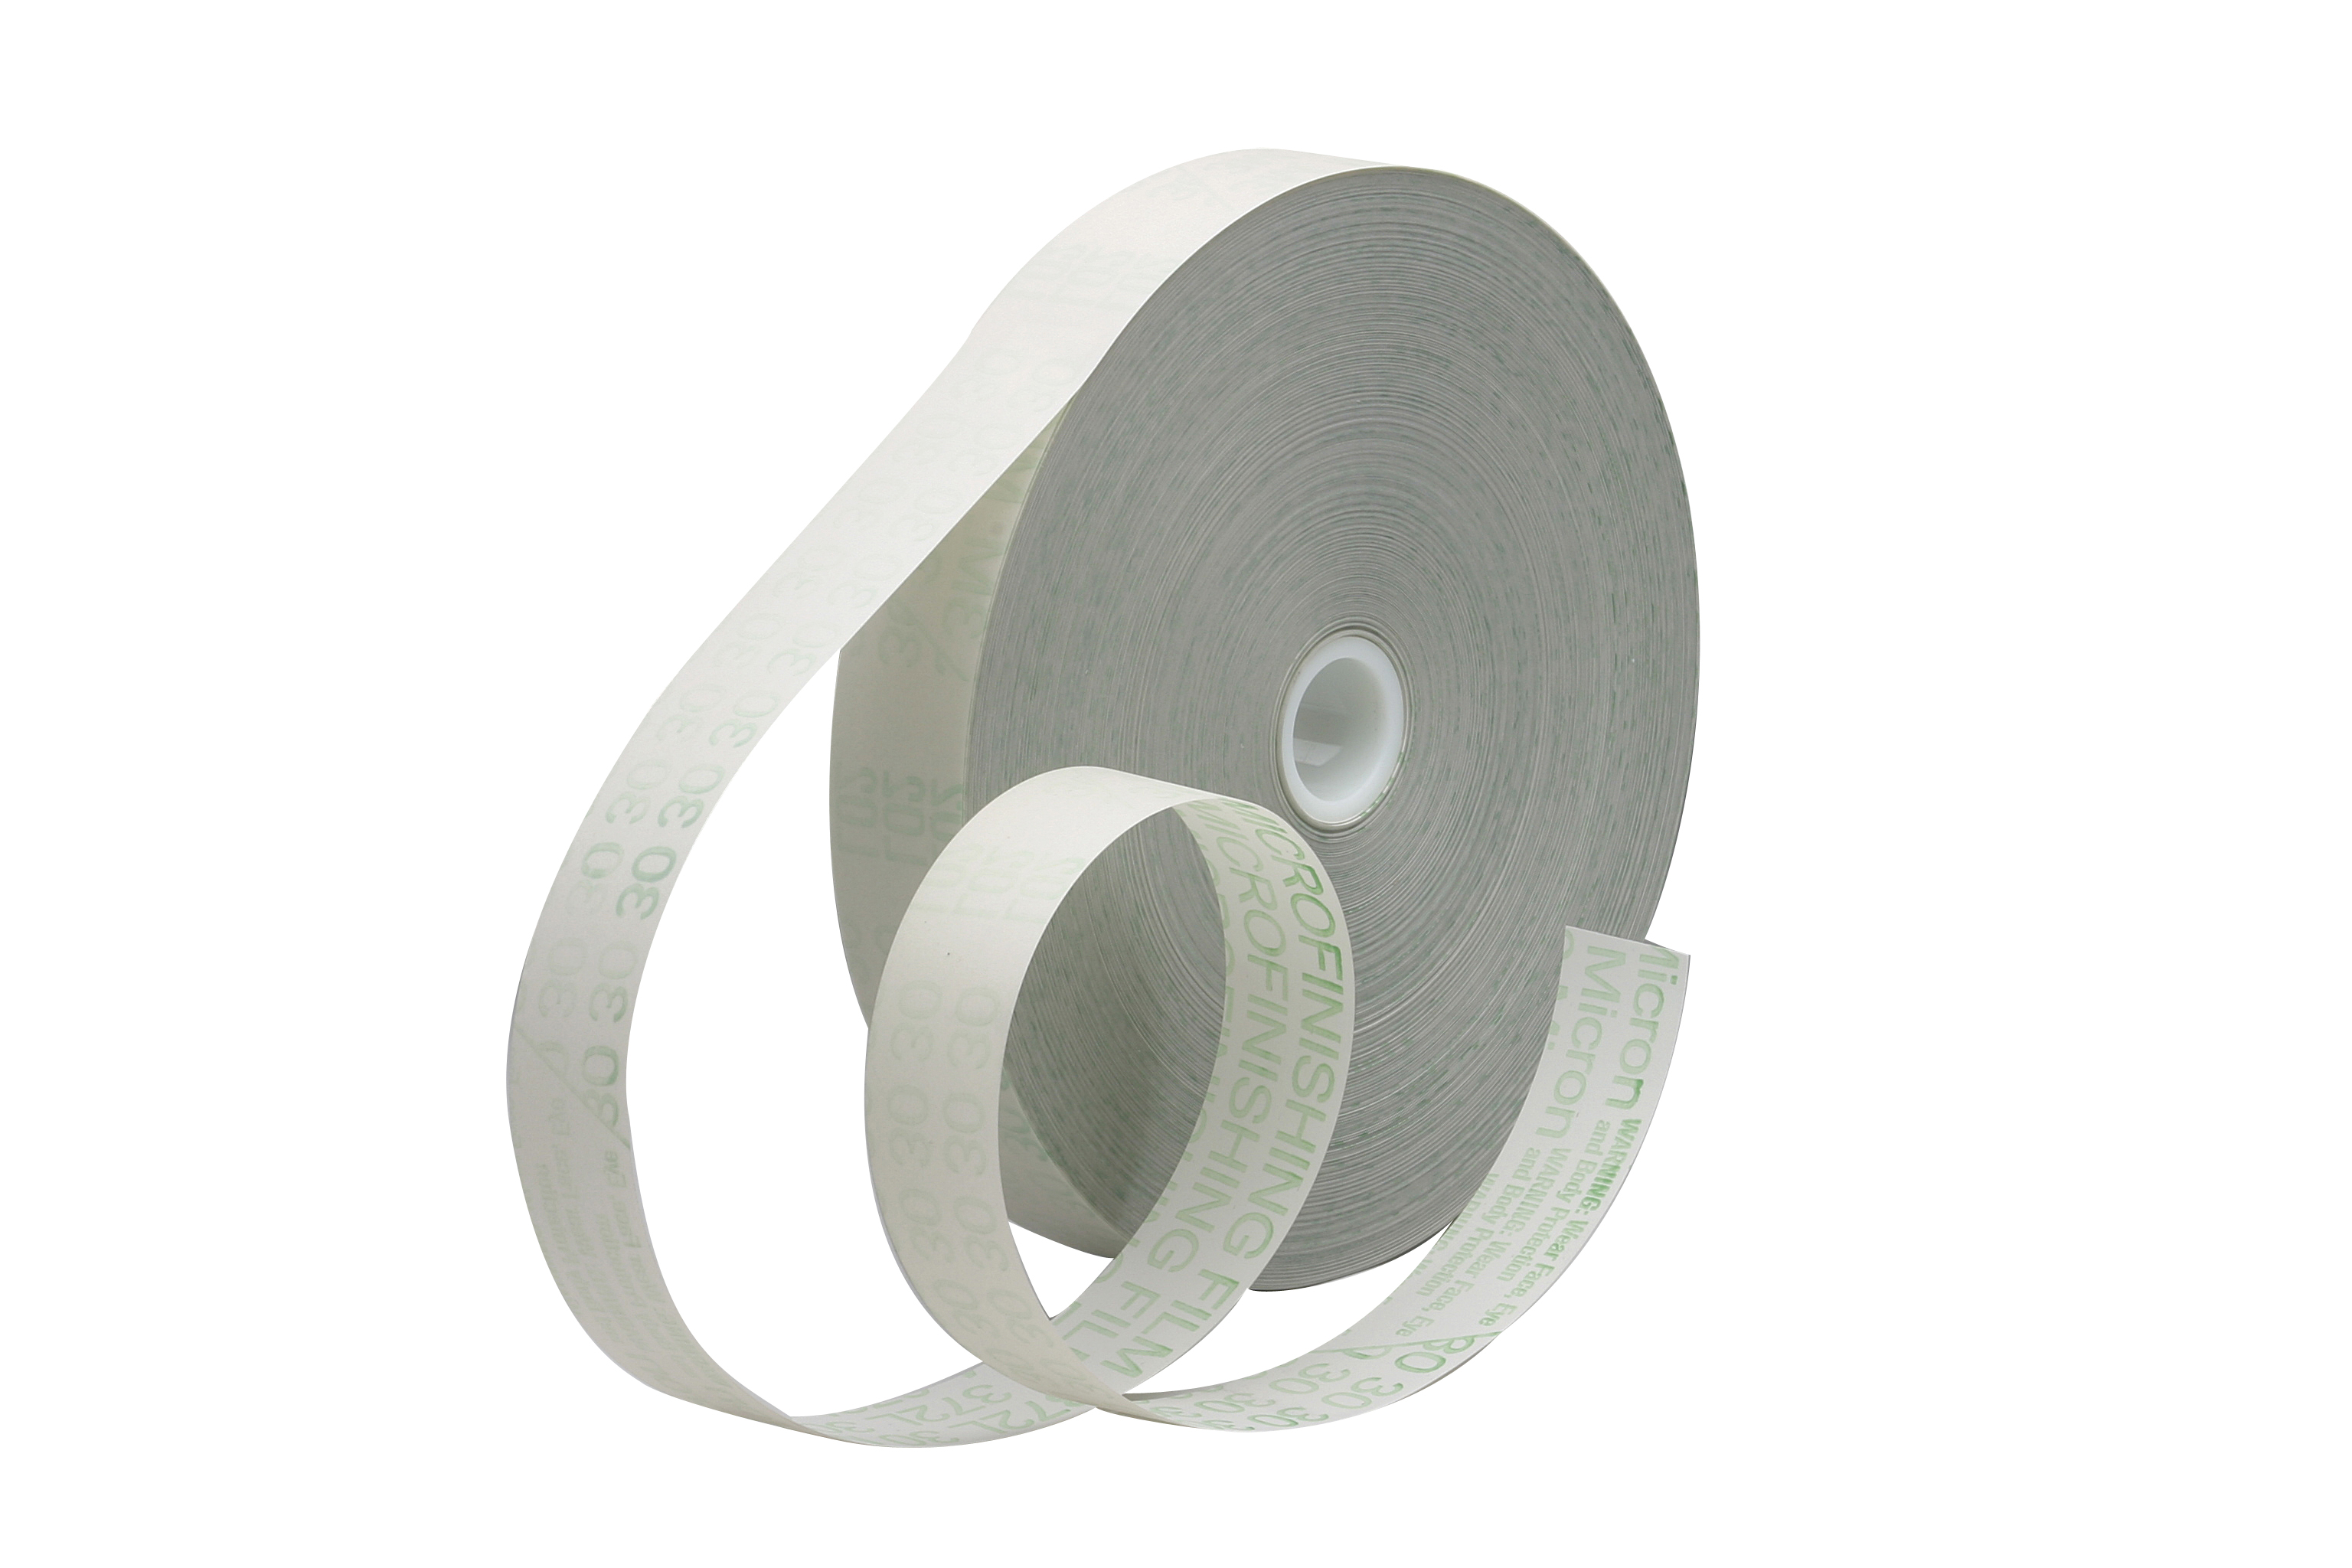 5m & 10m lengths 2mm thick Solid ply reinfrorced insertion neoprene rubber strip 5m x 50mm wide various widths available water/oil/weather seal